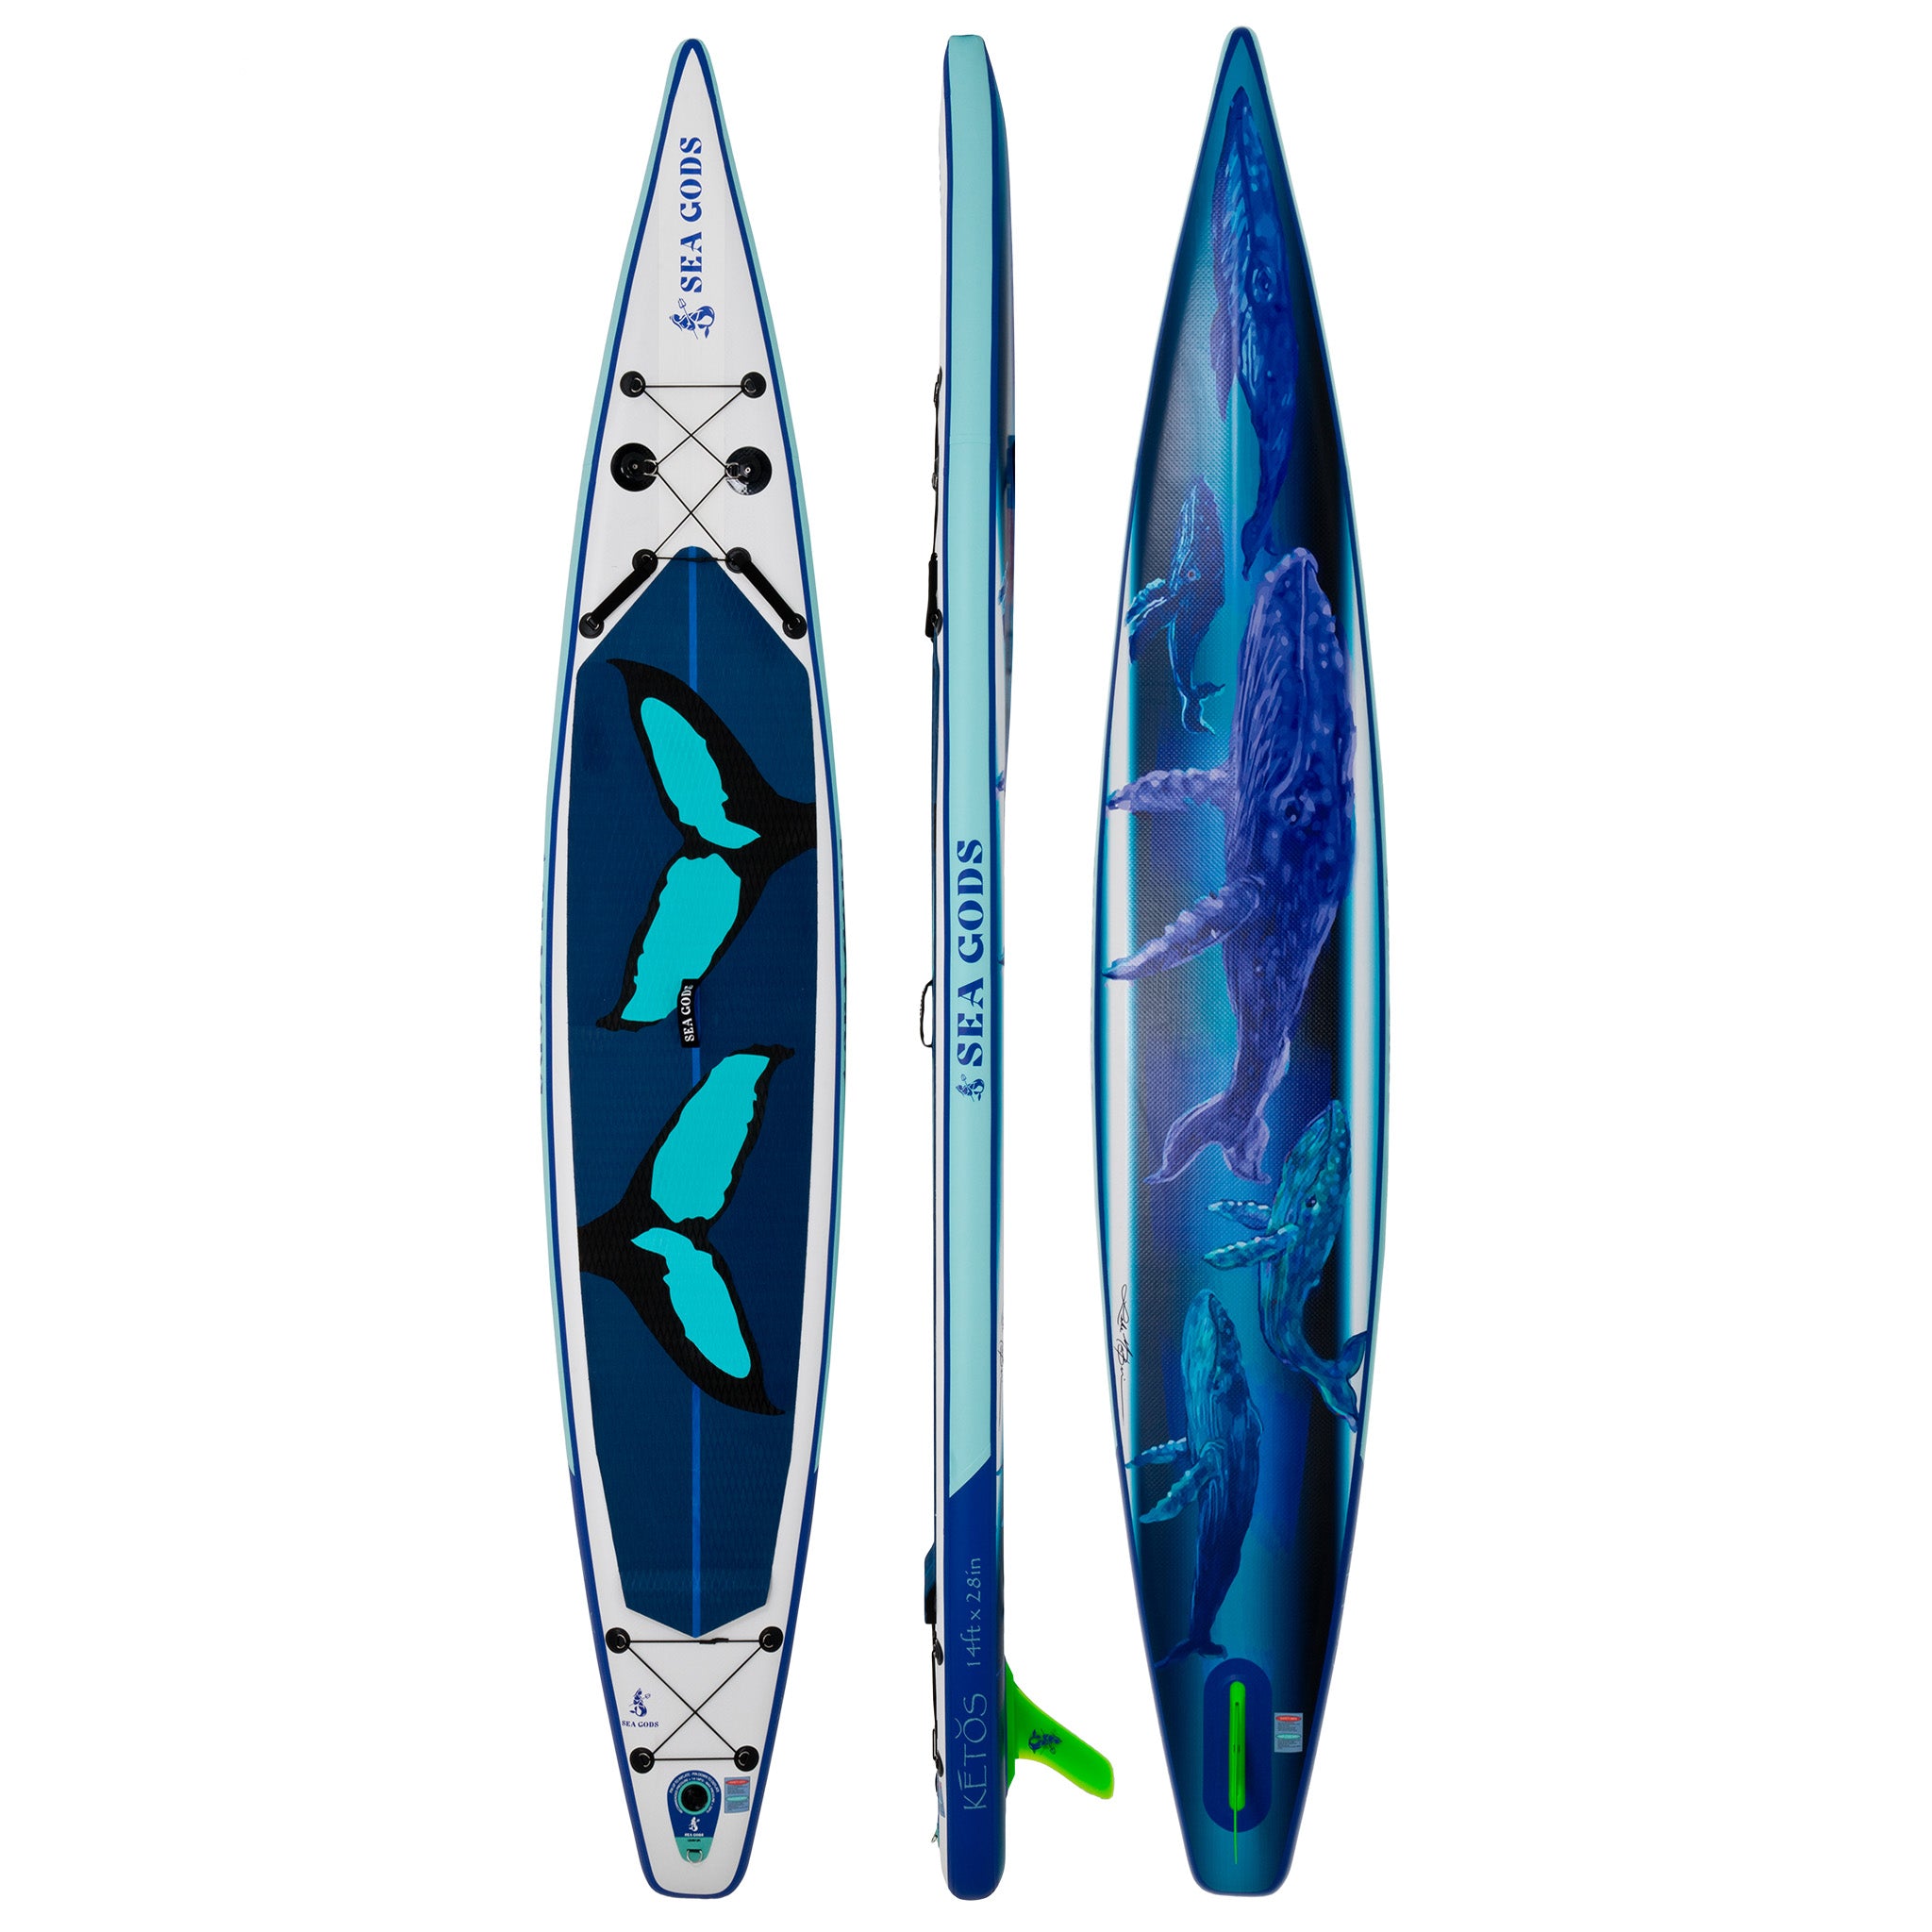 Racing SUP Paddle Board | KETOS by Sea Gods | Free Shipping in Canada